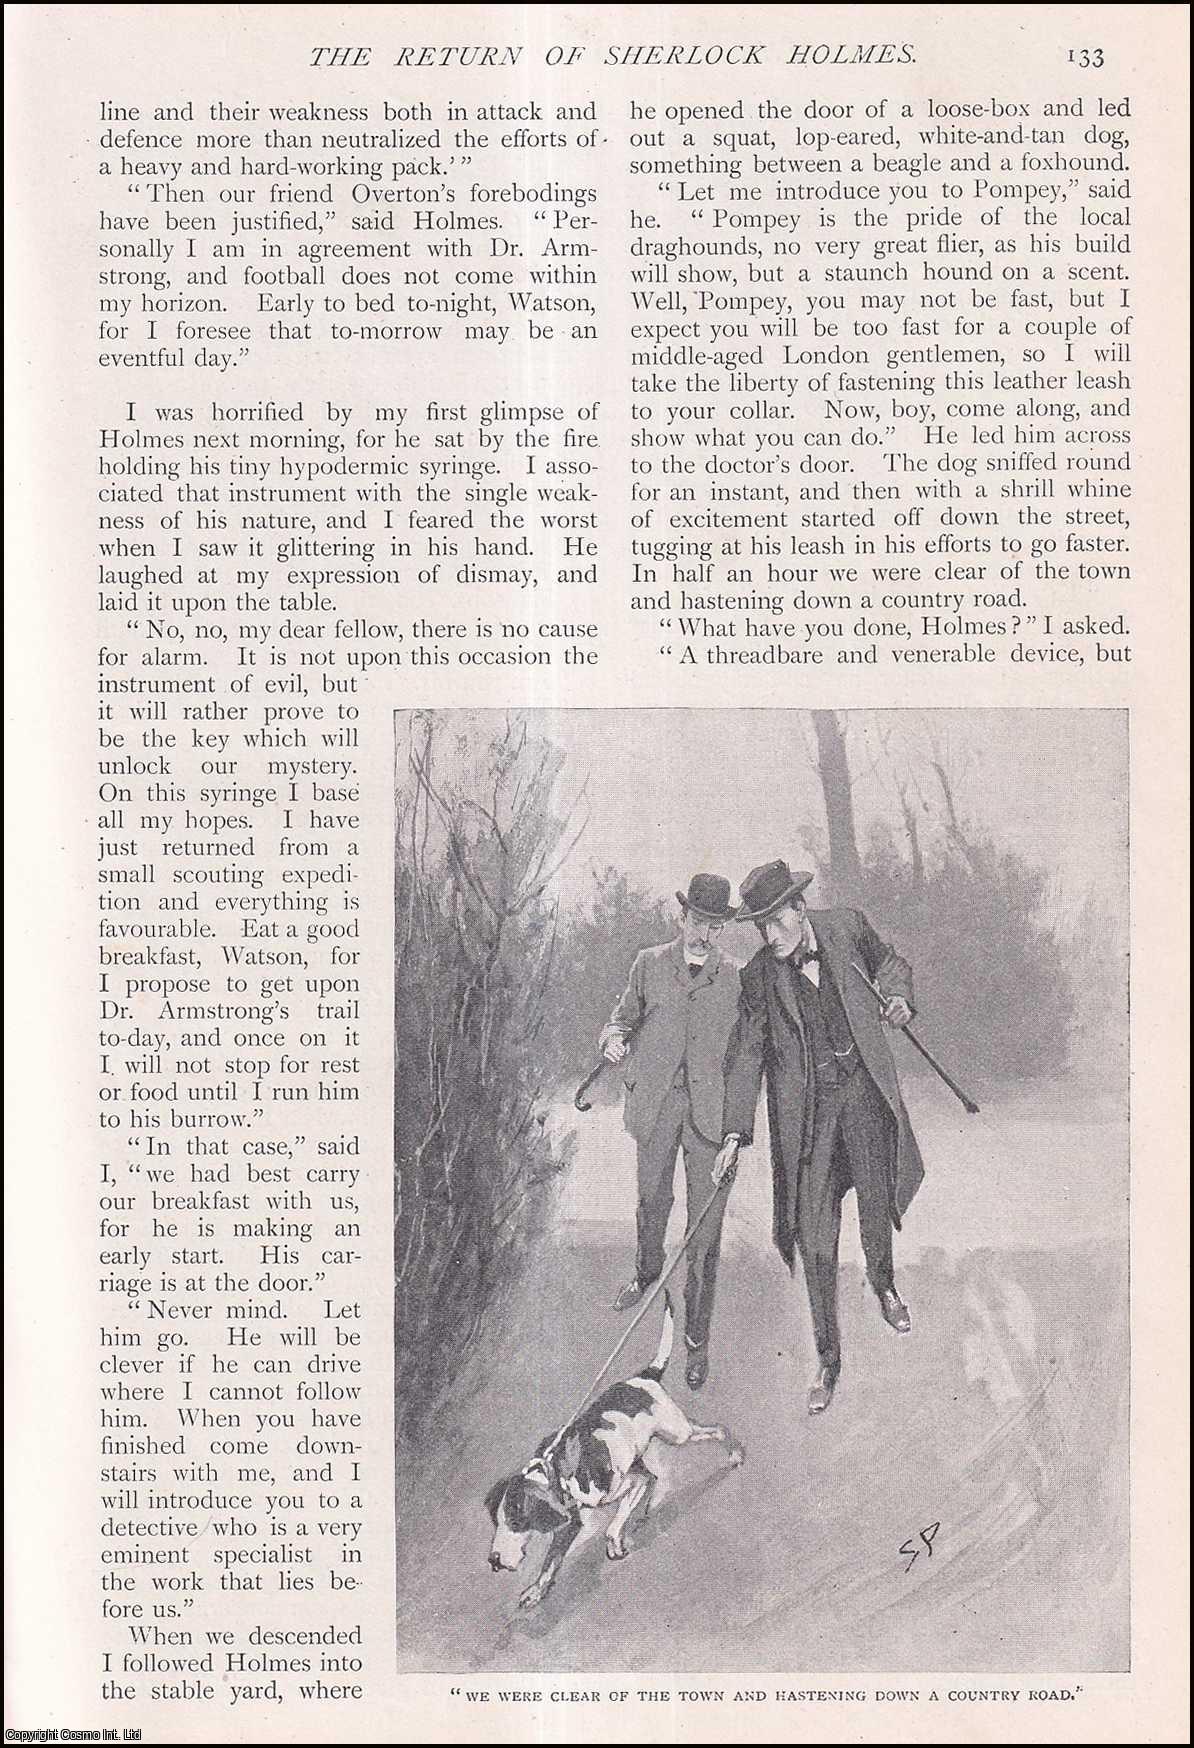 Arthur Conan Doyle - The Adventure of the Missing Three-Quarter, by A. Conan Doyle. The Return of Sherlock Holmes. An uncommon original article from The Strand Magazine, 1904.